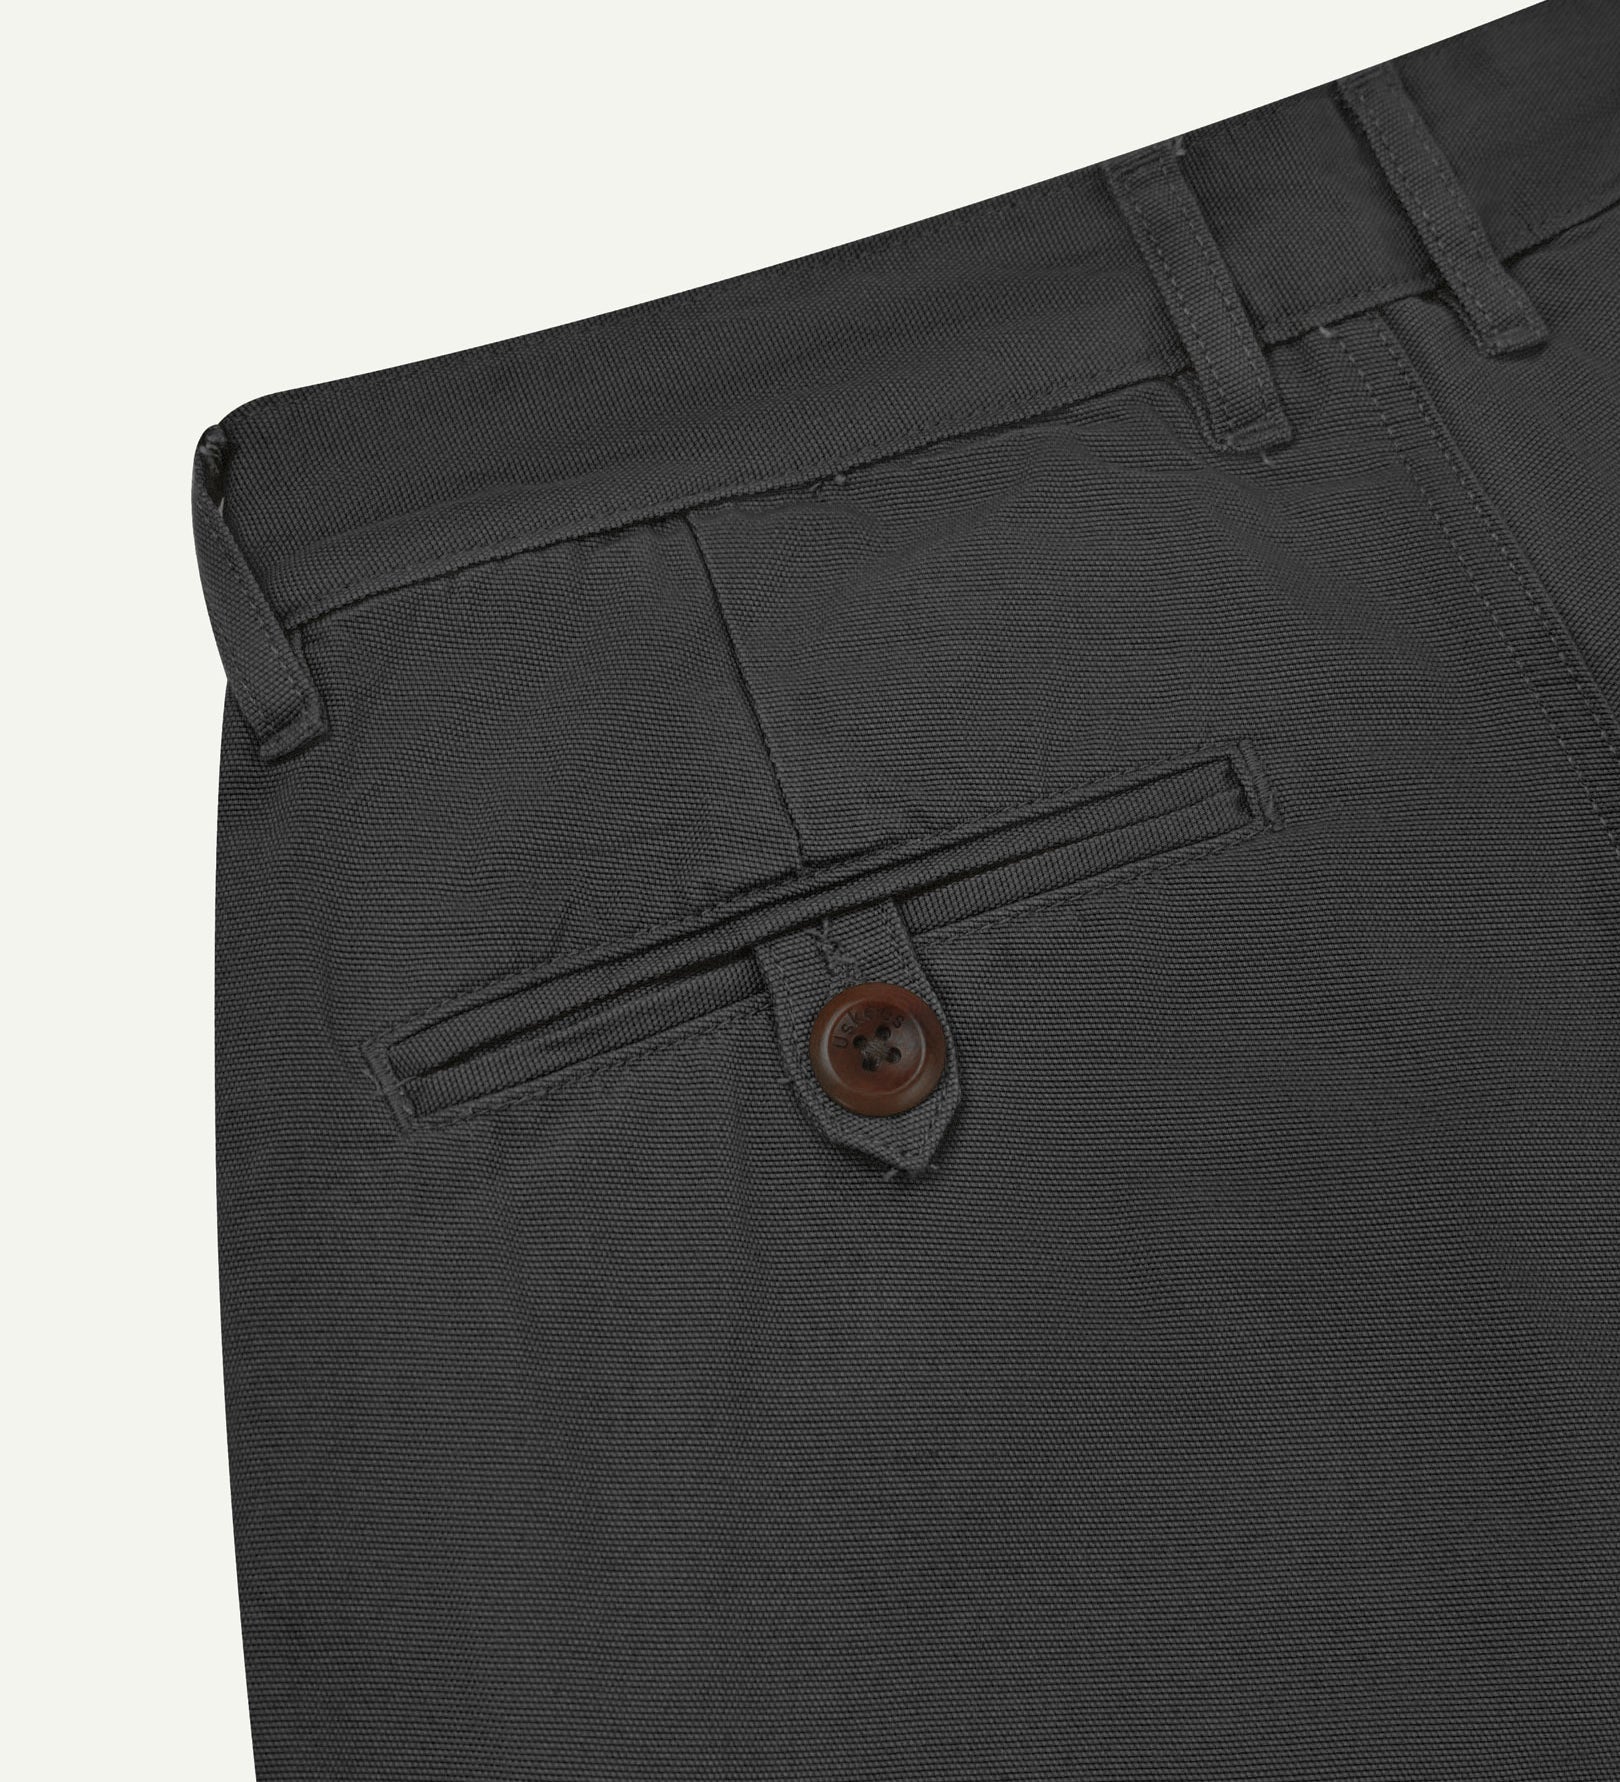 Back close-up view of 5018 Uskees men's organic mid-weight cotton boat trousers in acid charcoal grey showing belt loops and buttoned back pocket.